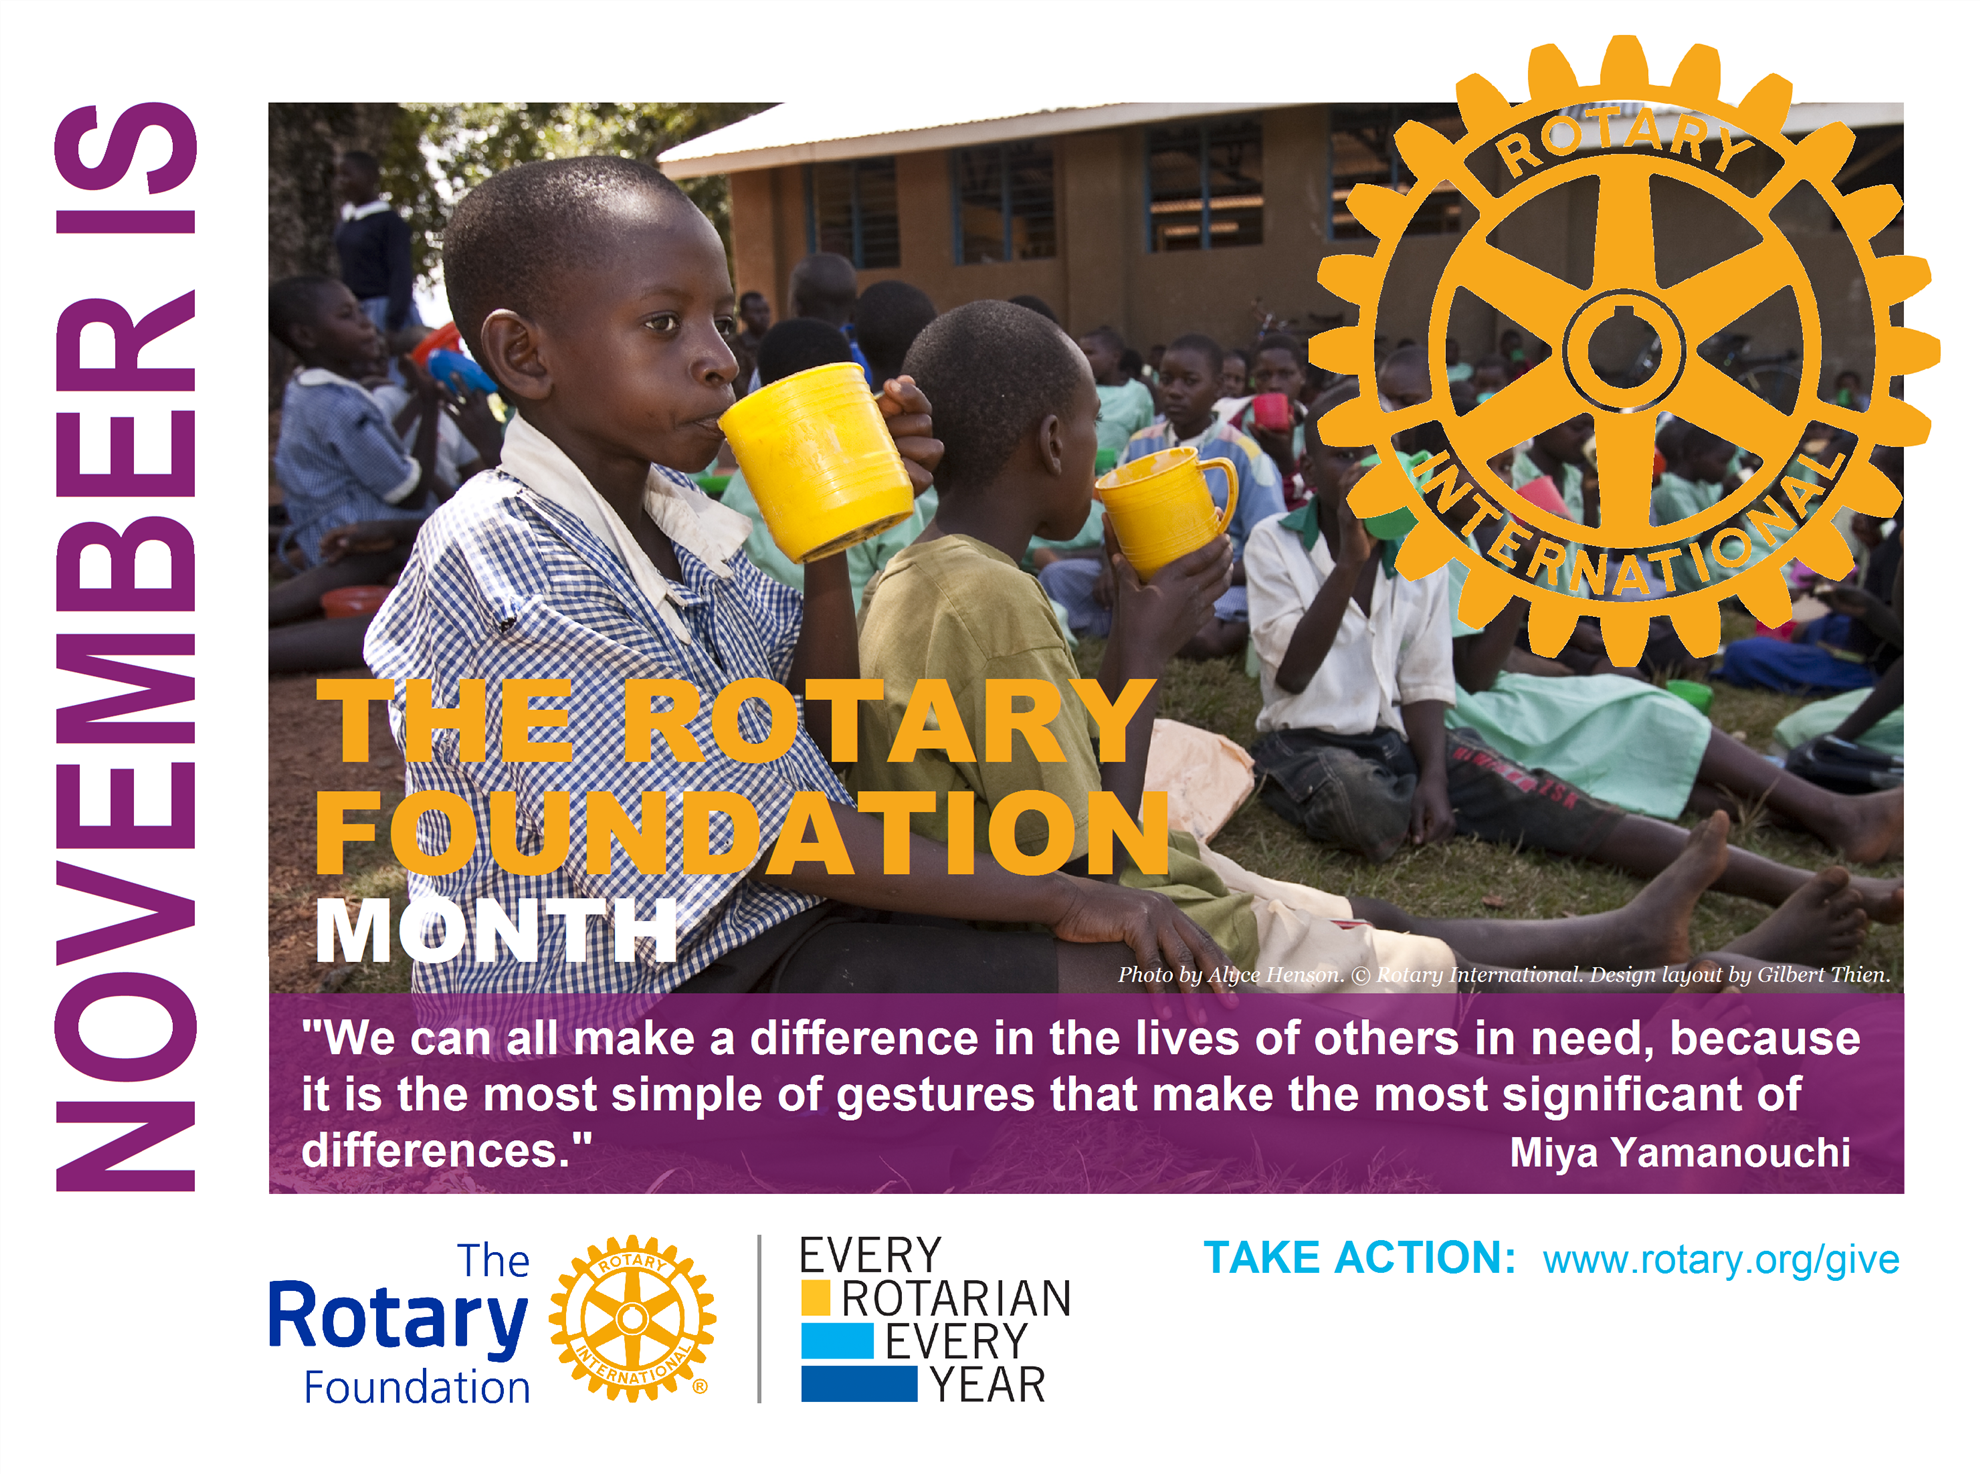 November is Rotary Foundation Month